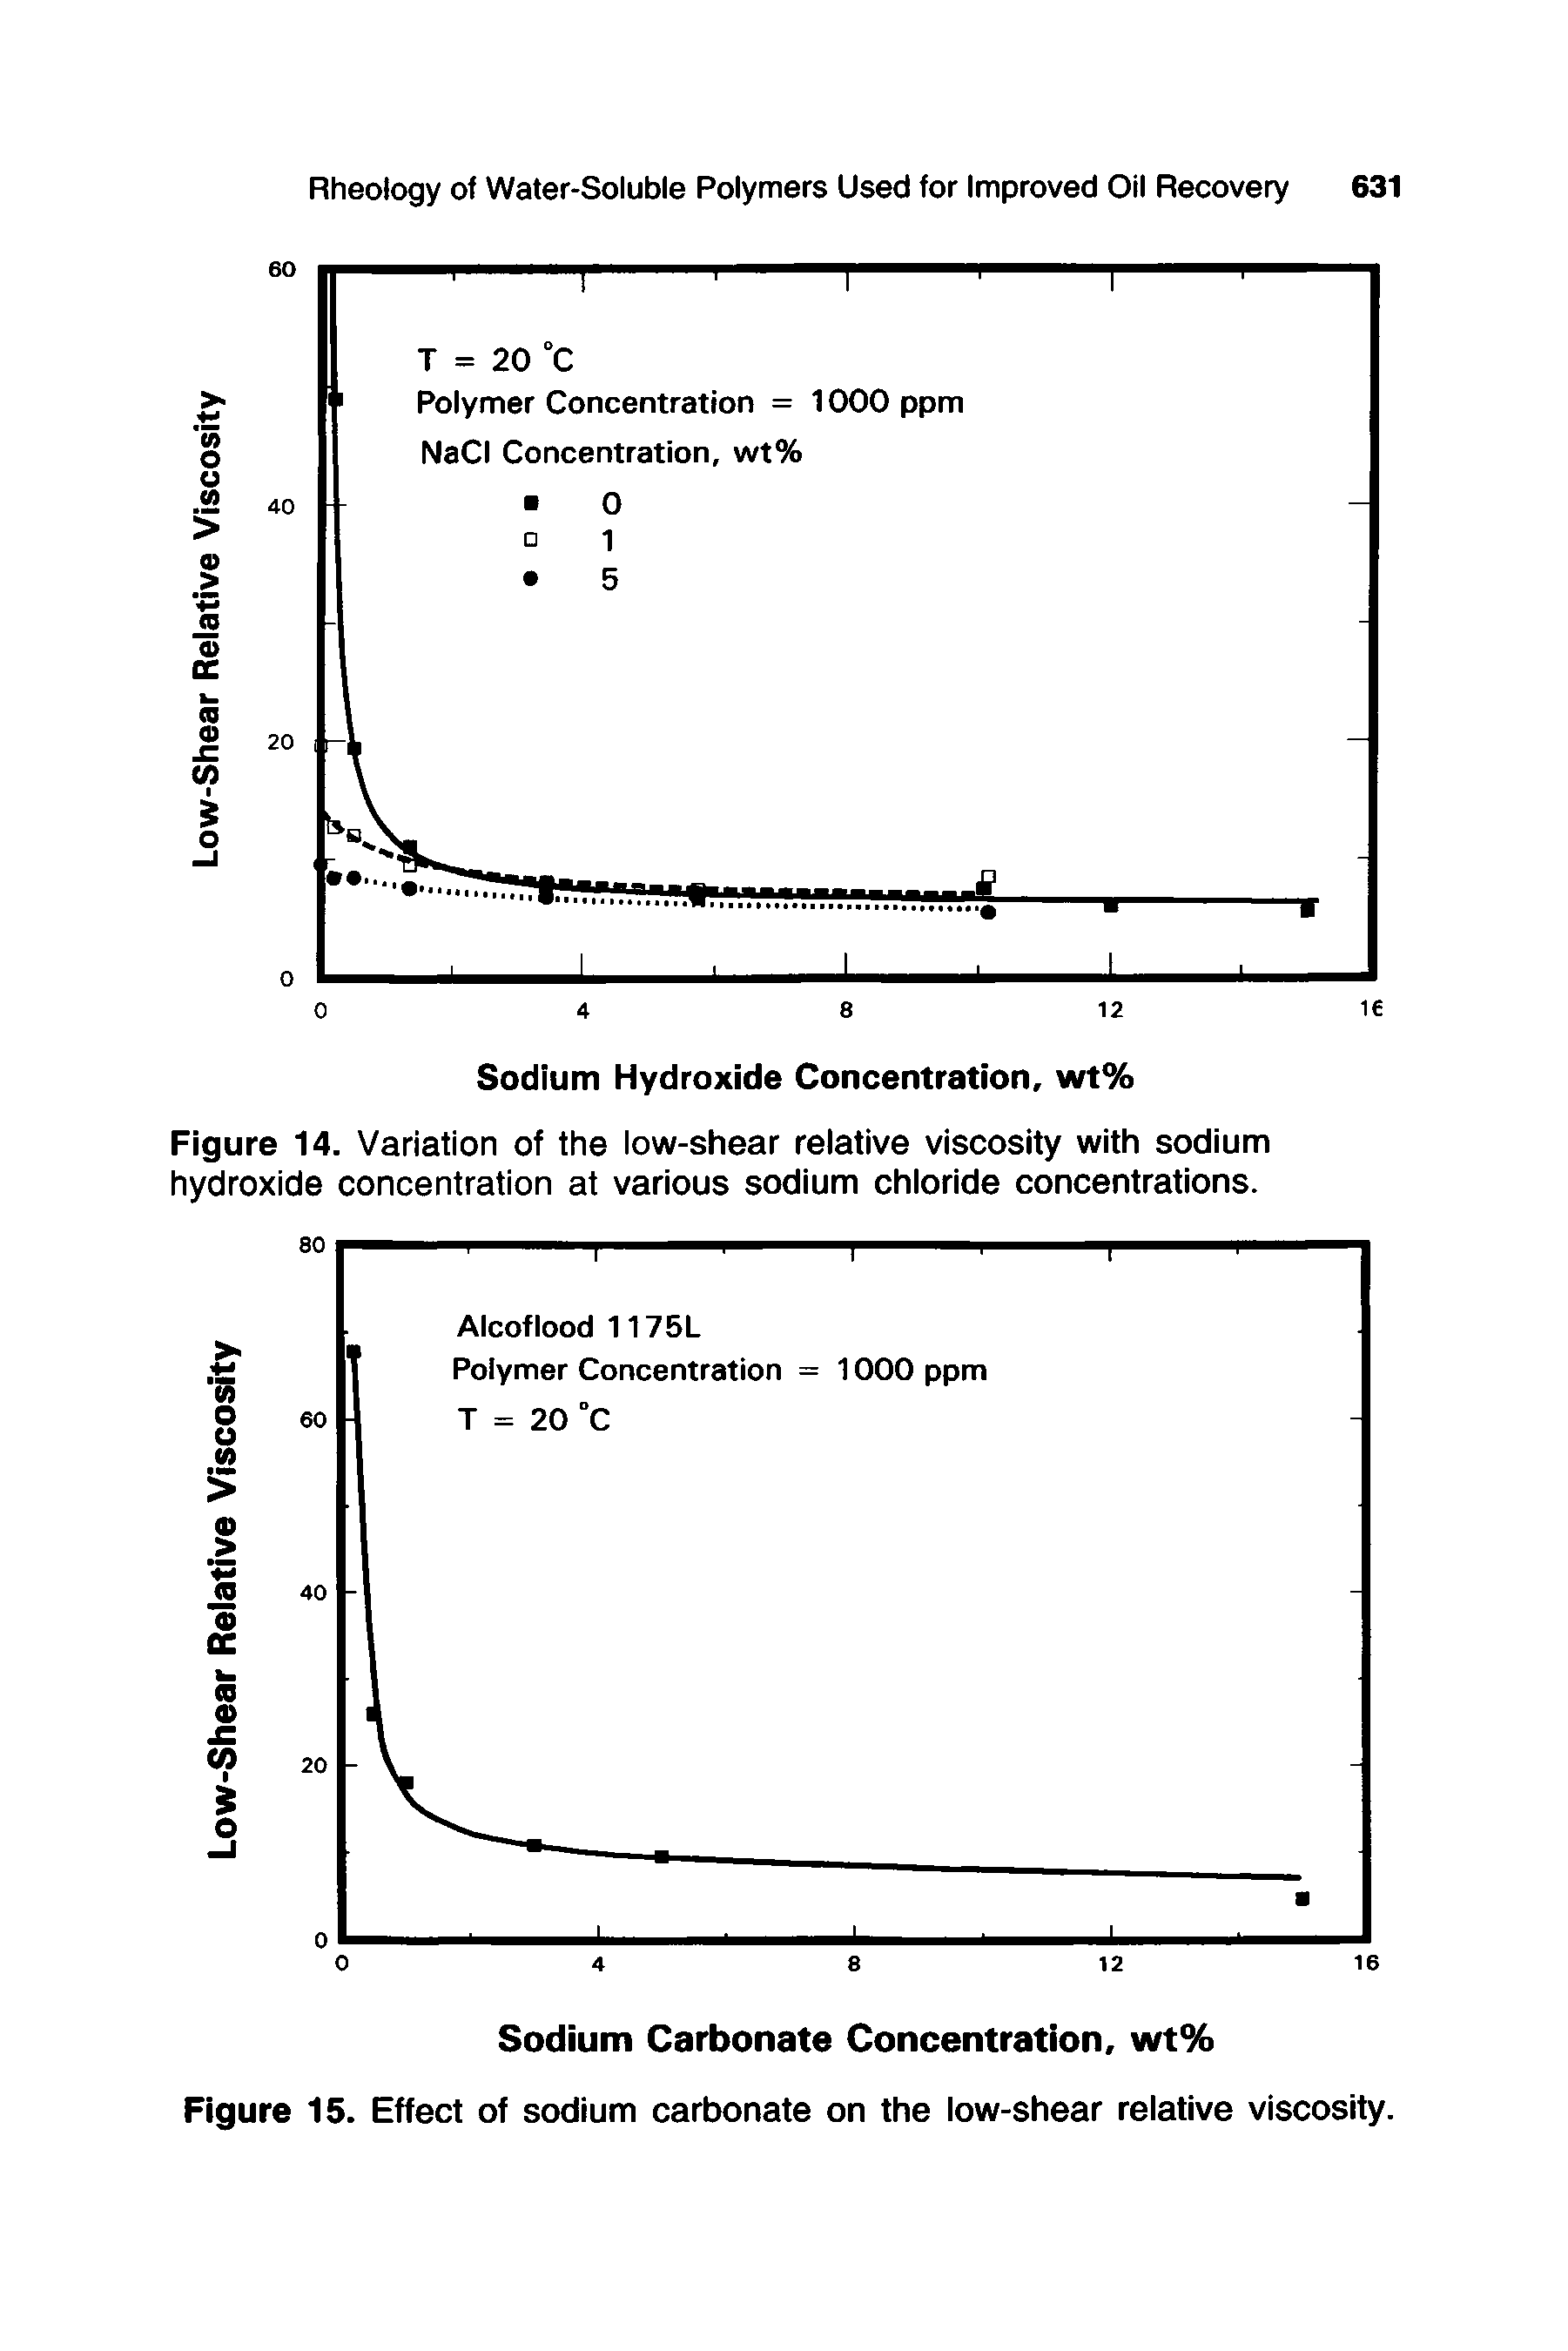 Figure 14. Variation of the low-shear relative viscosity with sodium hydroxide concentration at various sodium chloride concentrations.